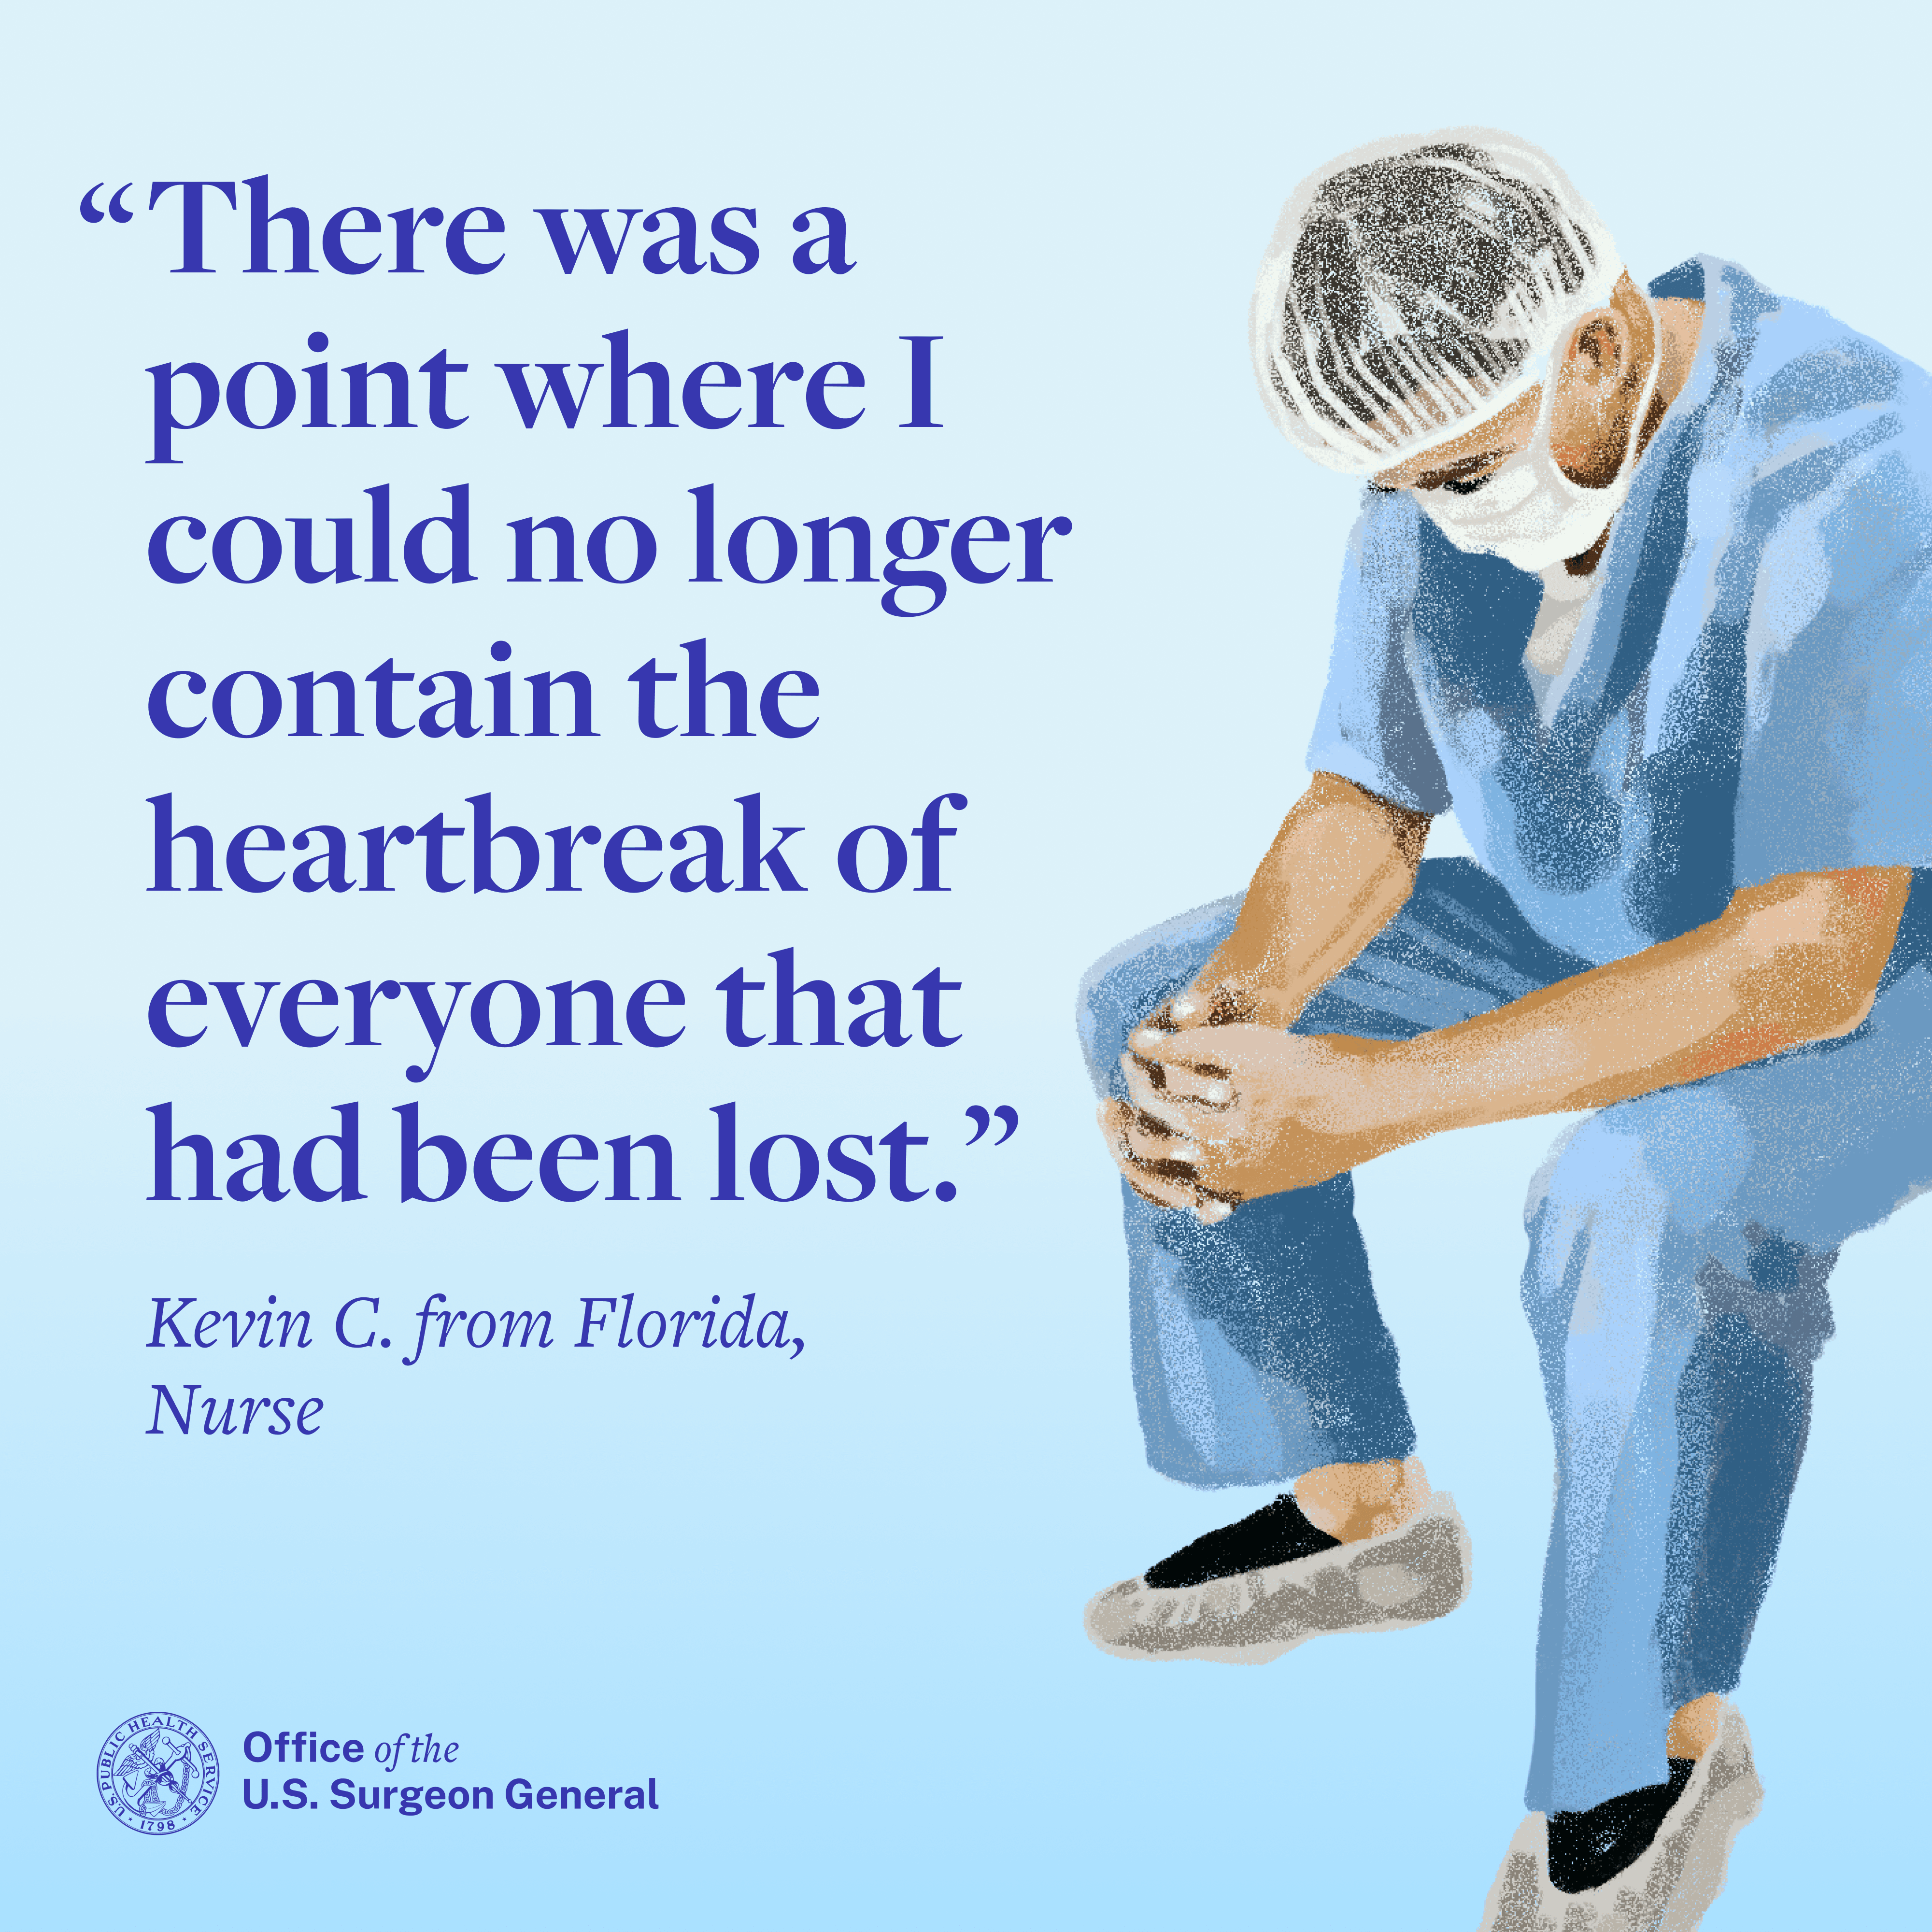 "There was a point where I could no longer contain the heartbreak of everyone that had been lost." Kevin C. from Florida, Nurse